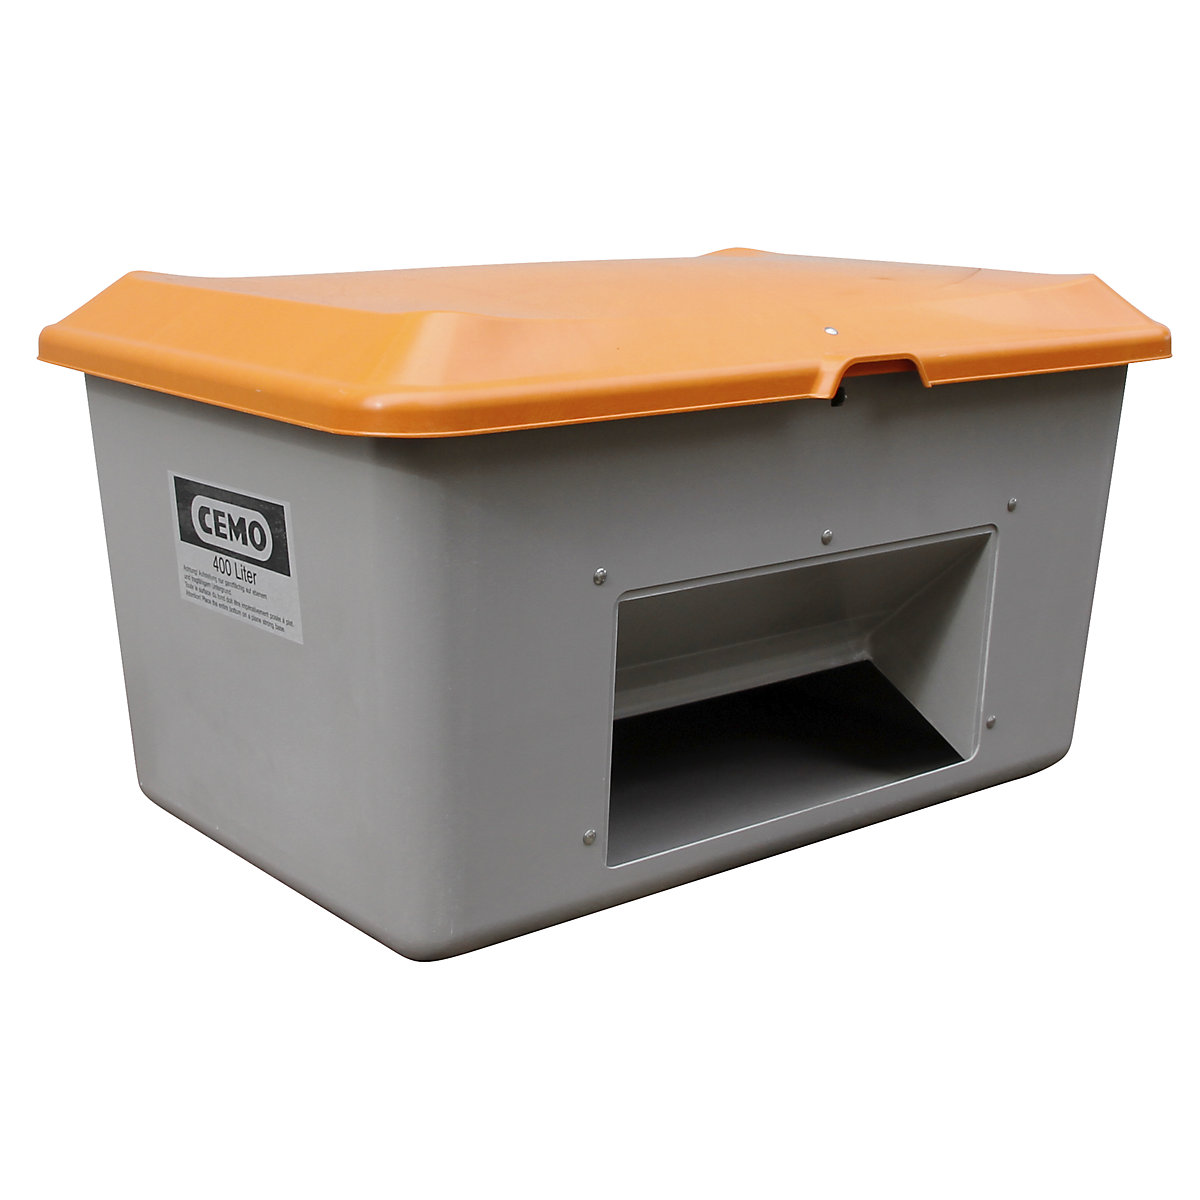 Grit container made of GRP - CEMO